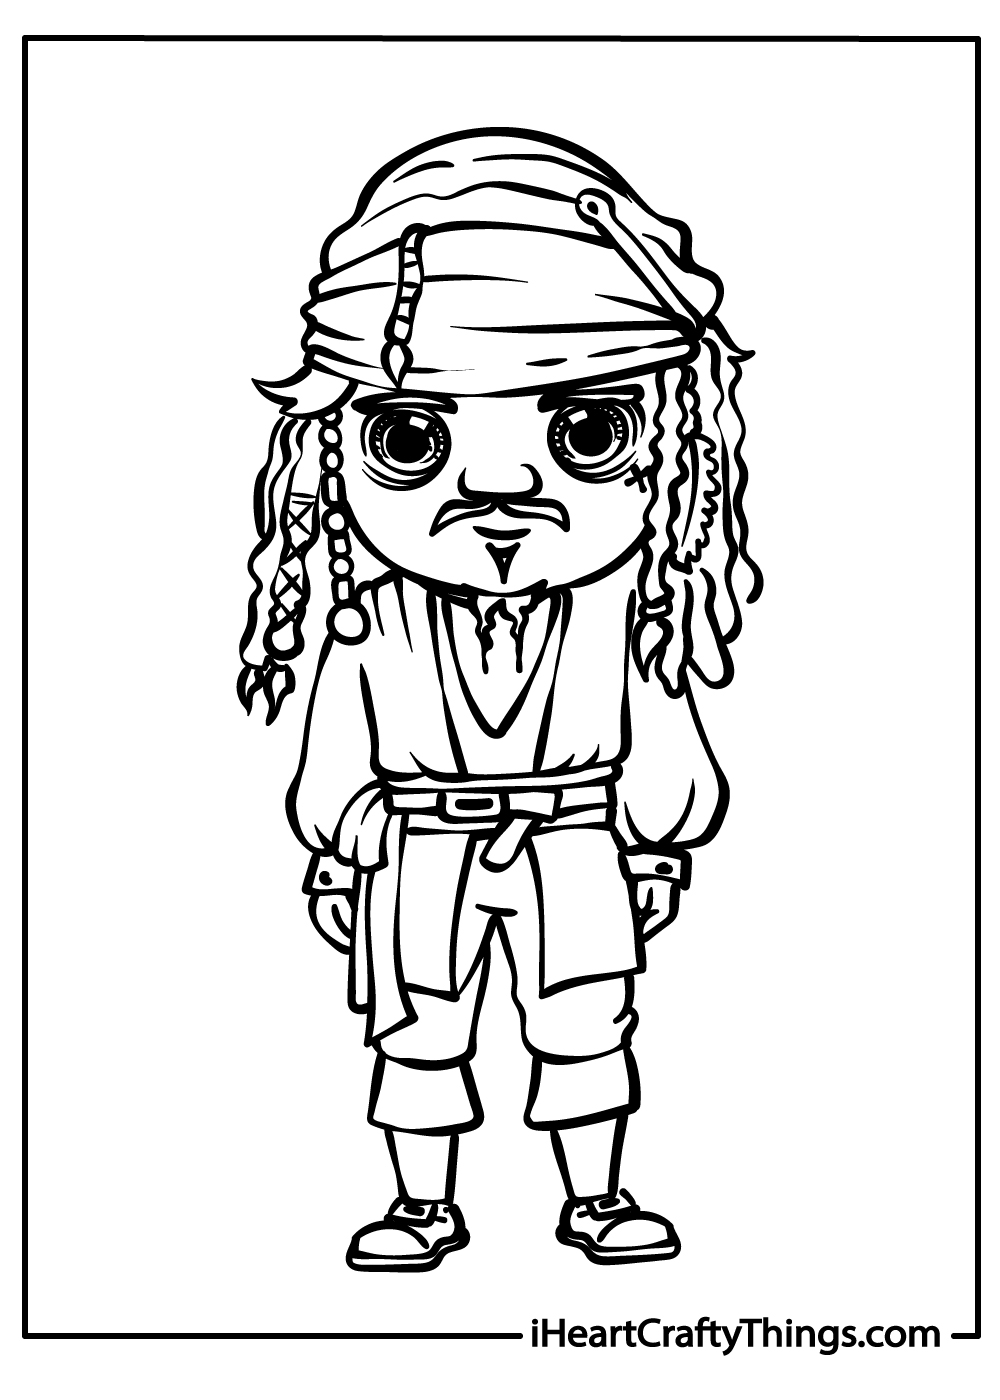 Pirates Coloring Pages free download